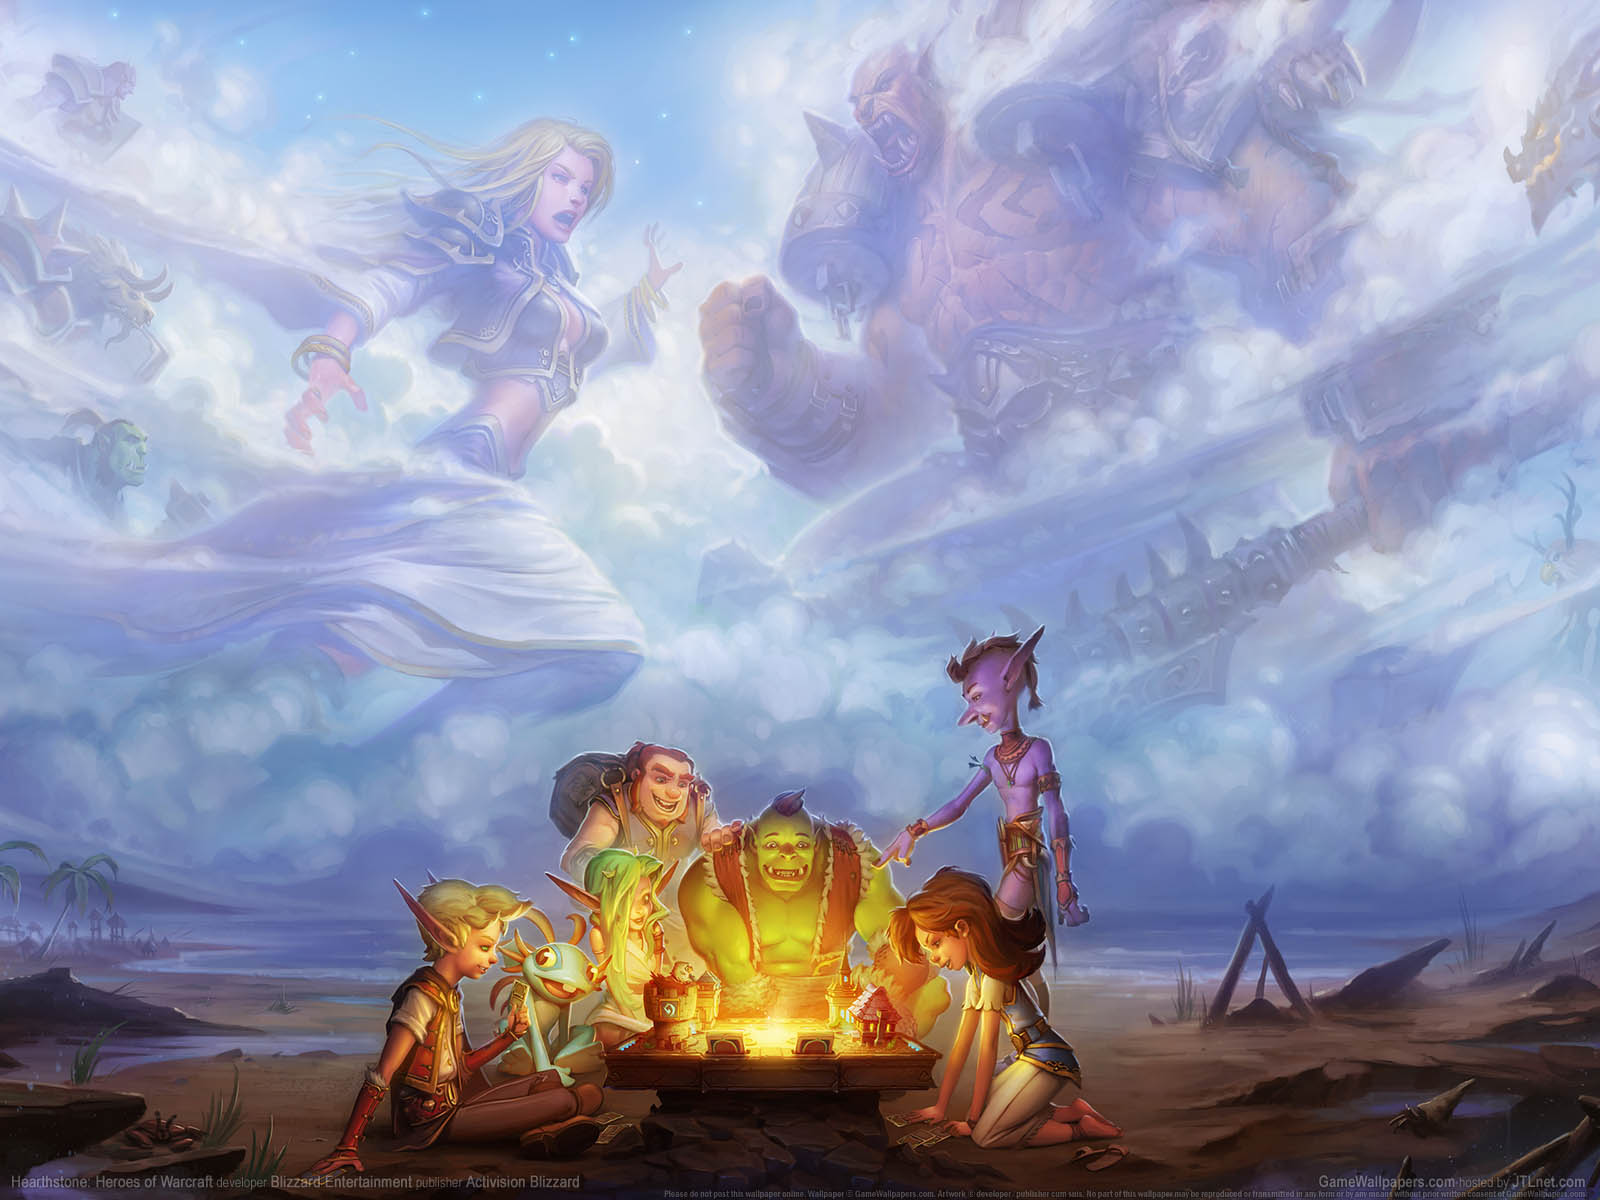 Hearthstone%253A Heroes of Warcraft wallpaper 09 1600x1200